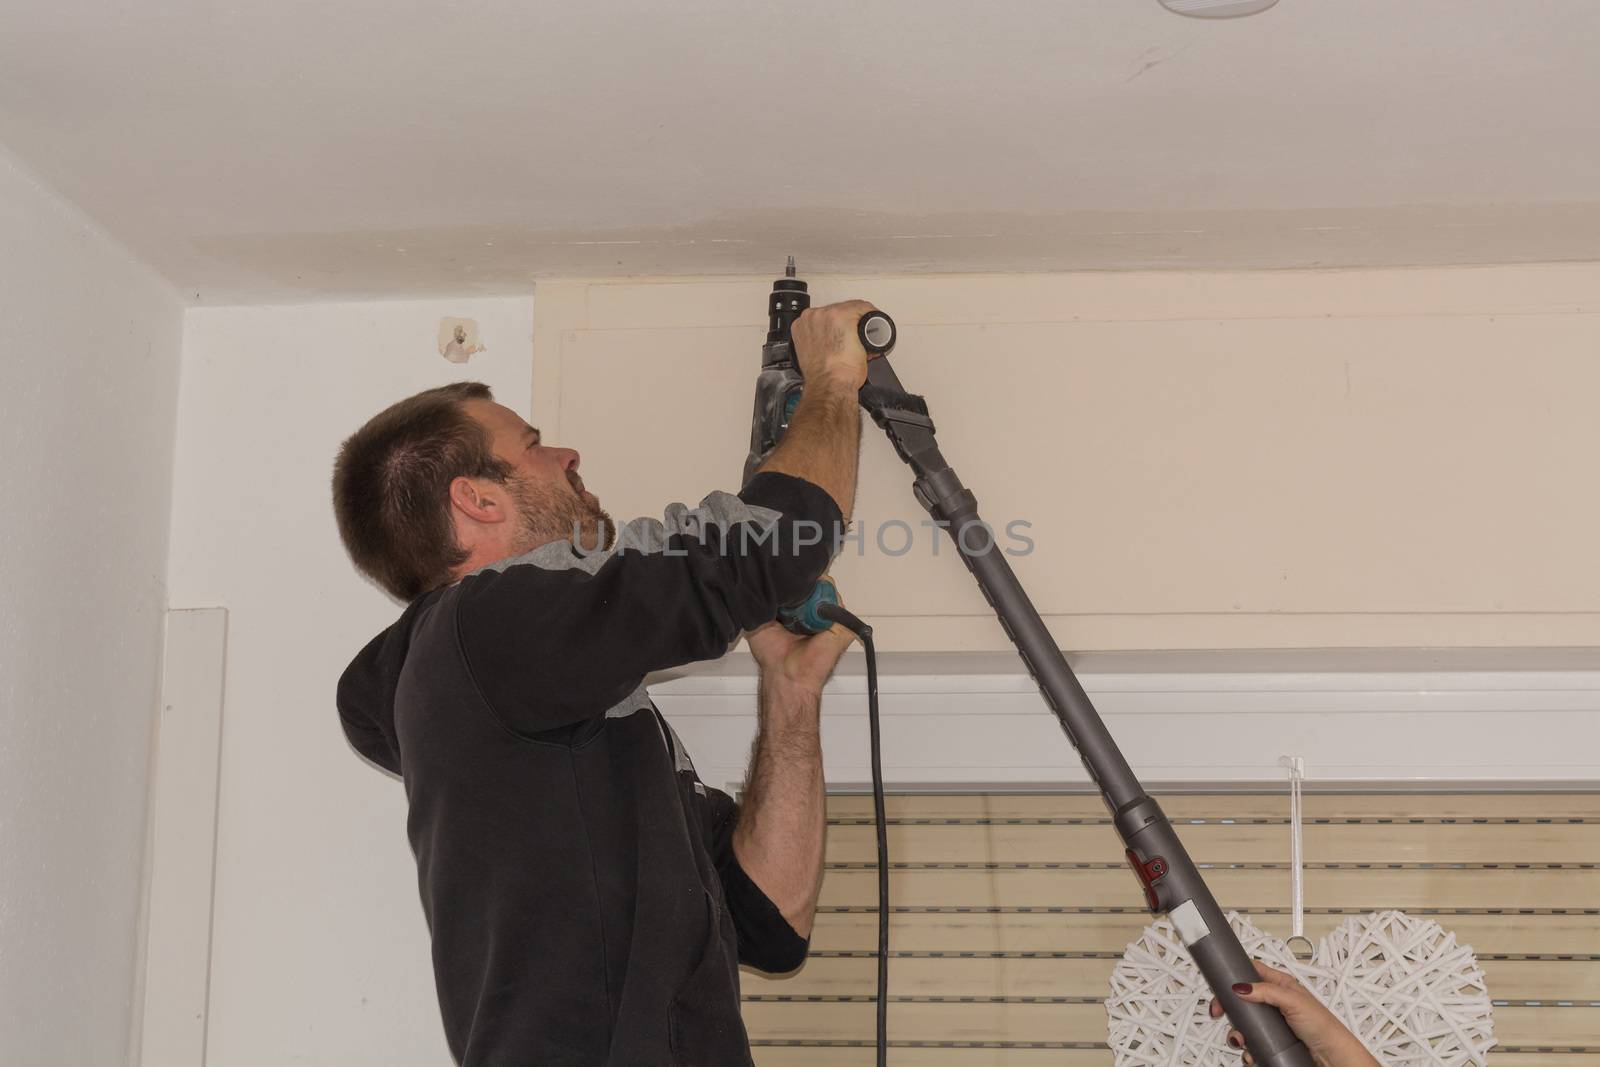 The man drills a hole in the ceiling before mounting a curtain rod